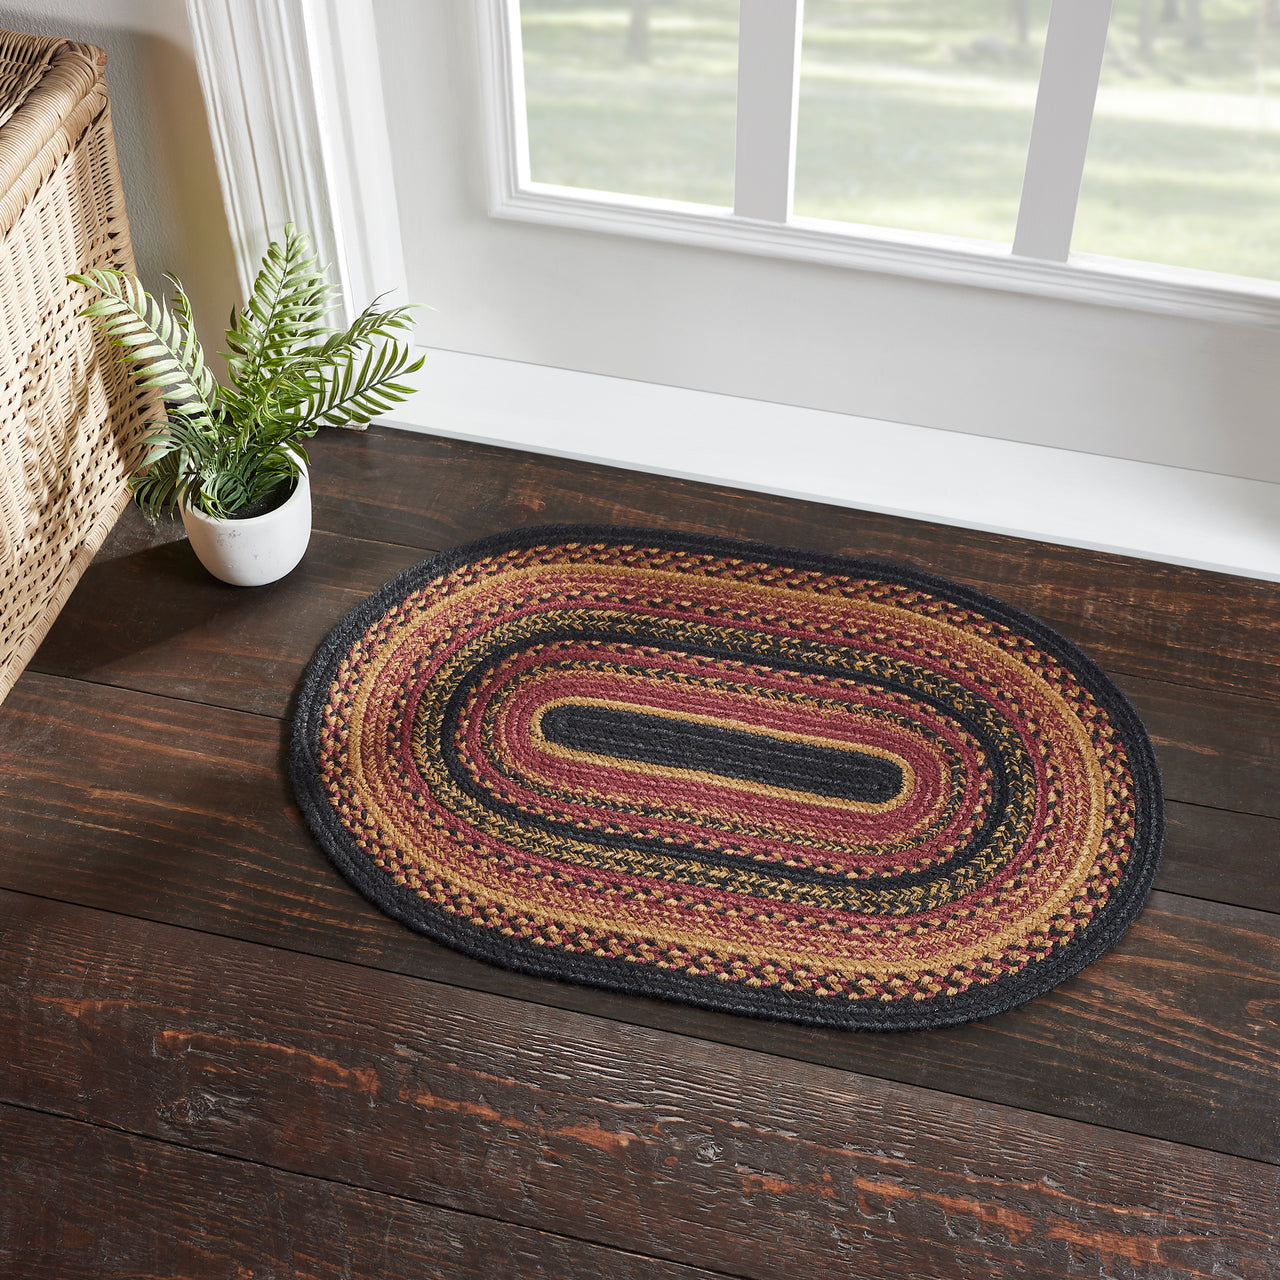 Heritage Farms Jute Braided Rug Oval with Rug Pad 20"x30" VHC Brands